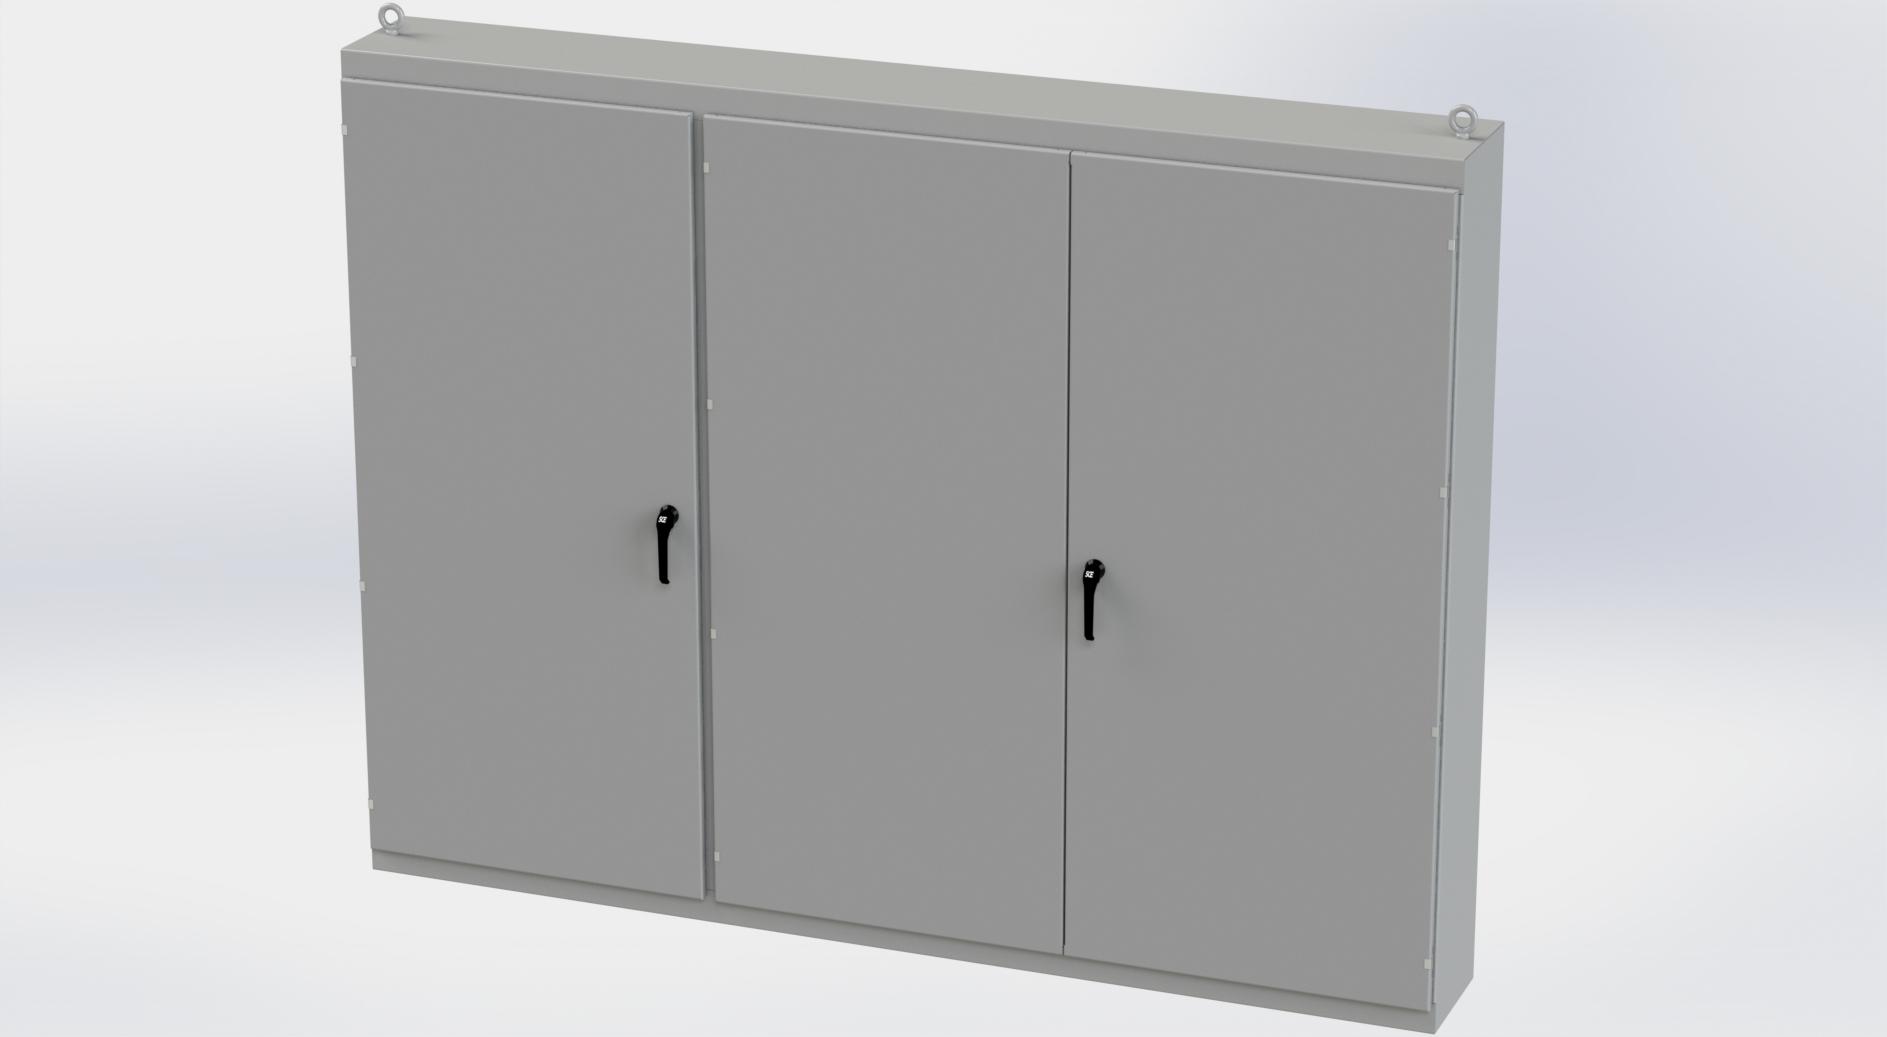 Saginaw Control SCE-86M3E Enclosure, Multi-Door, Height:86.00", Width:112.00", Depth:14.00", ANSI-61 gray powder coating inside and out. Sub-panels are powder coated white.